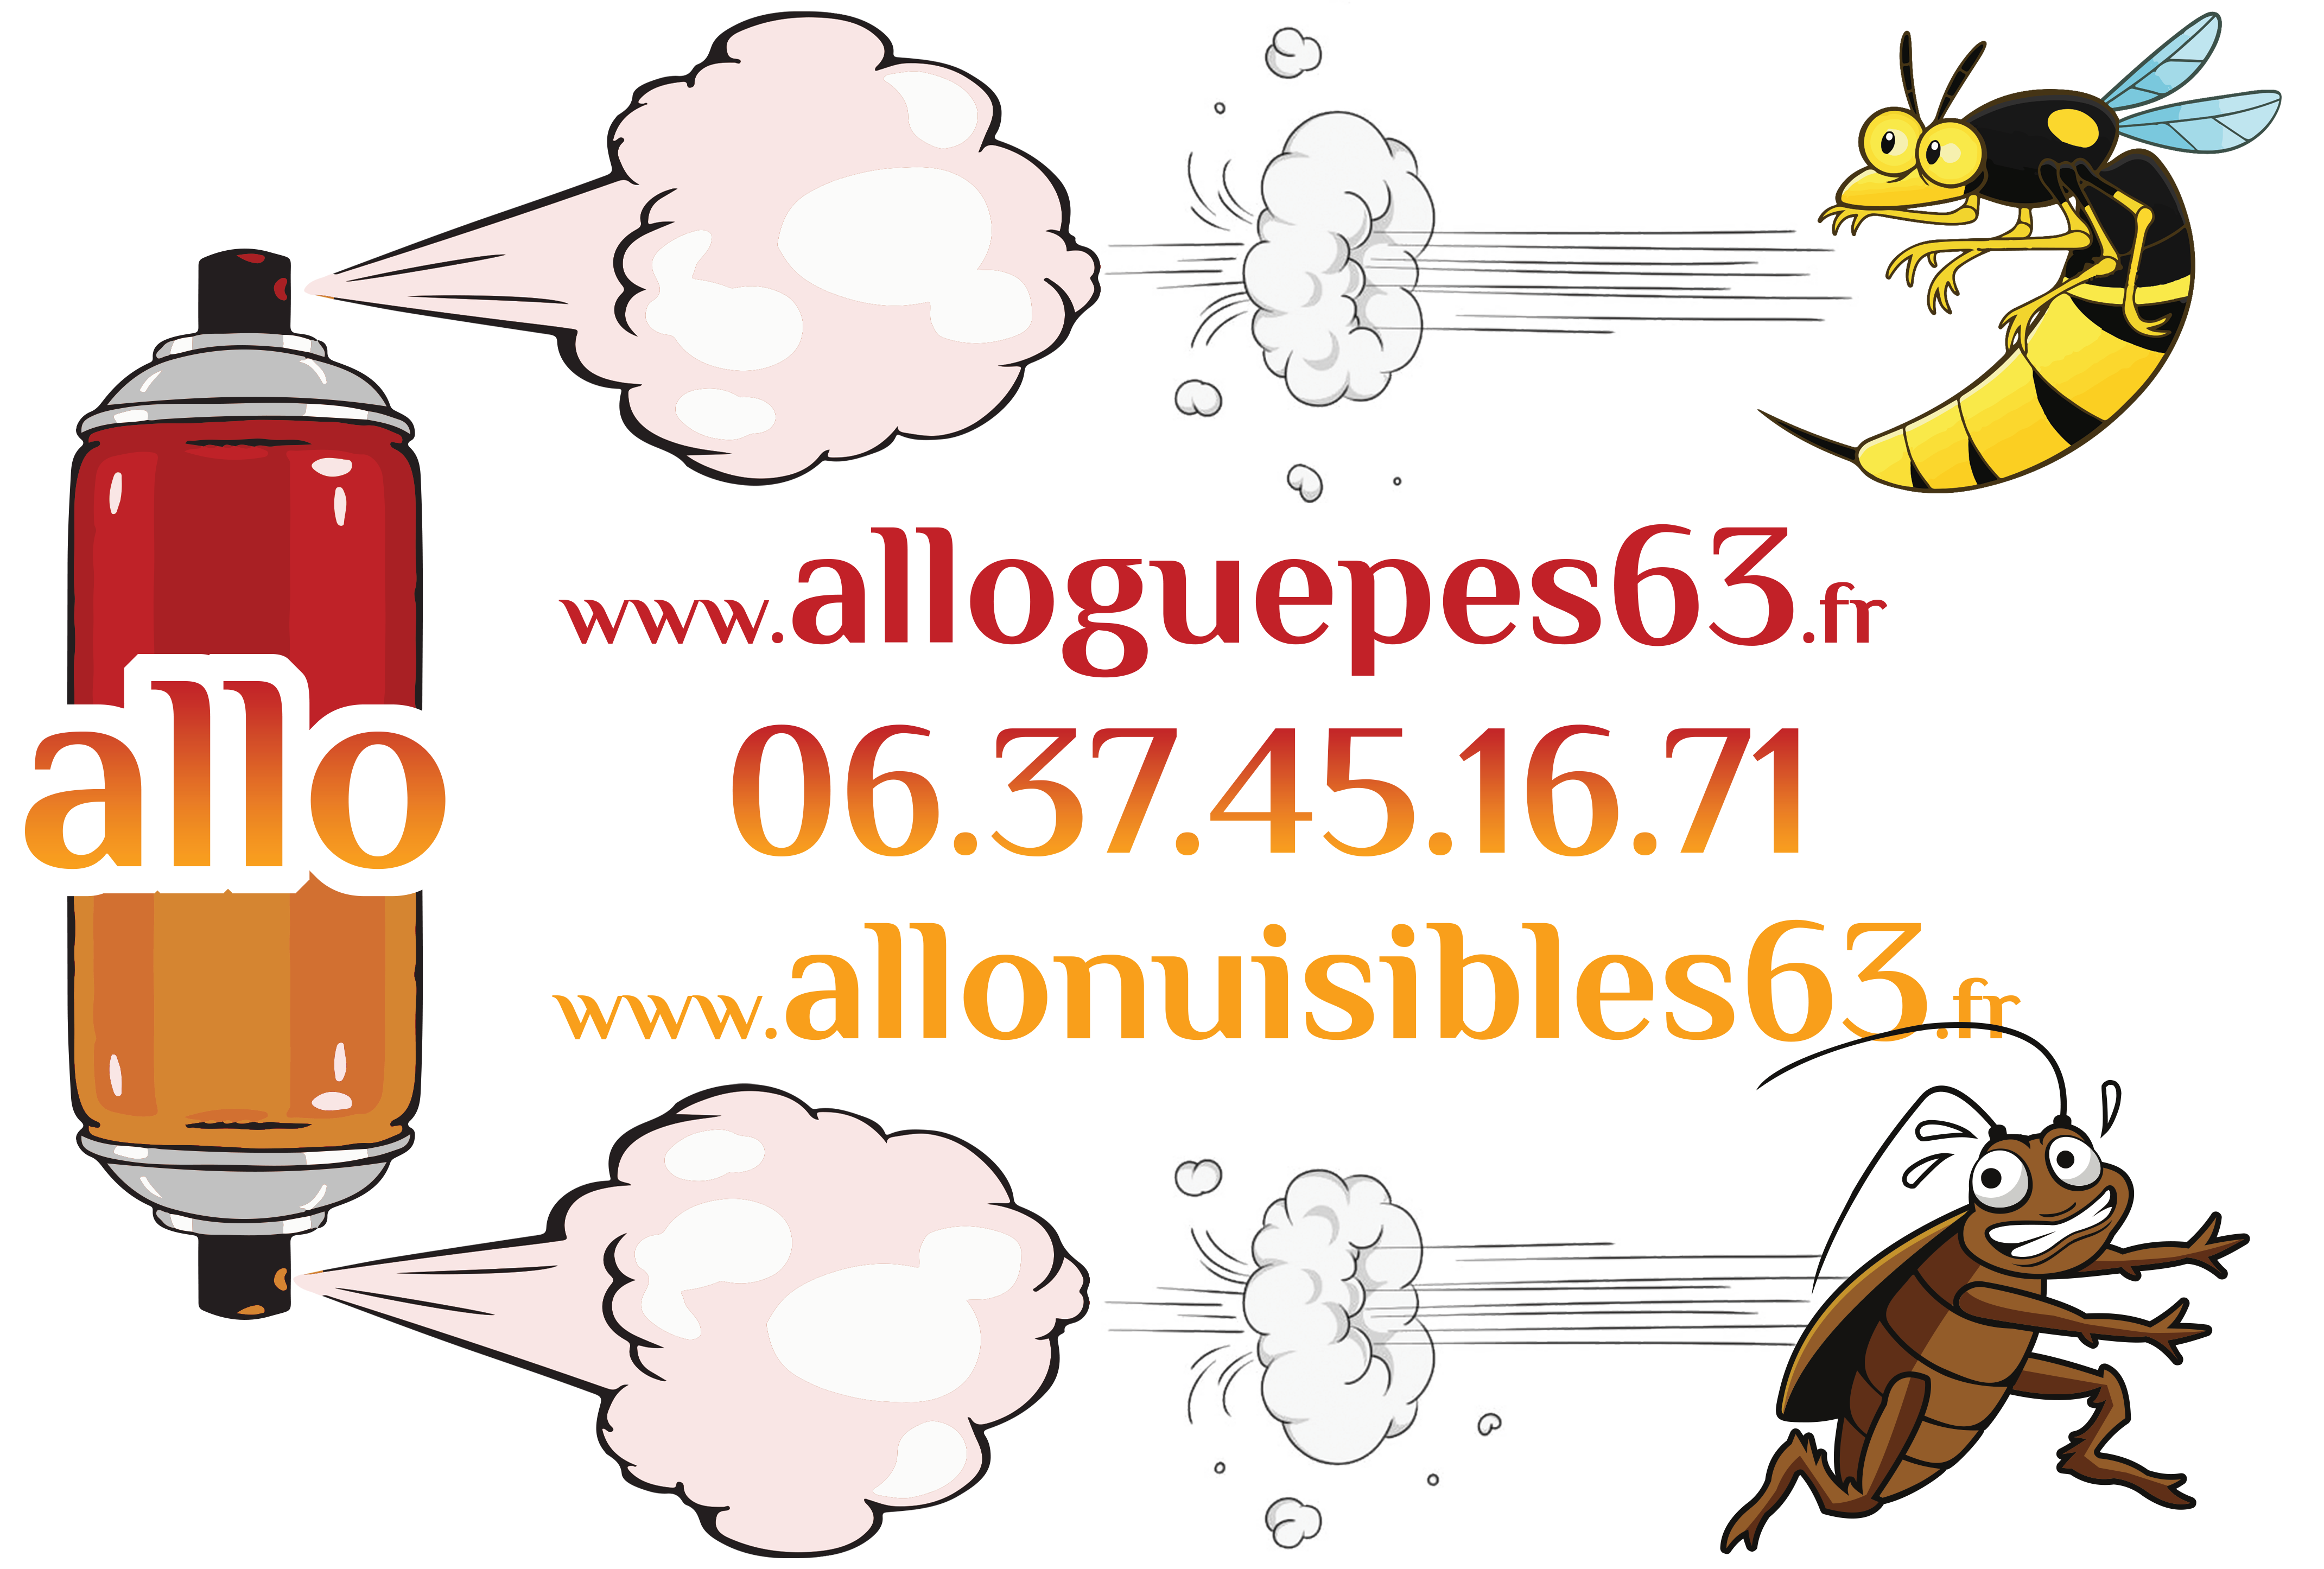 alloguepes et allonuisibles 63